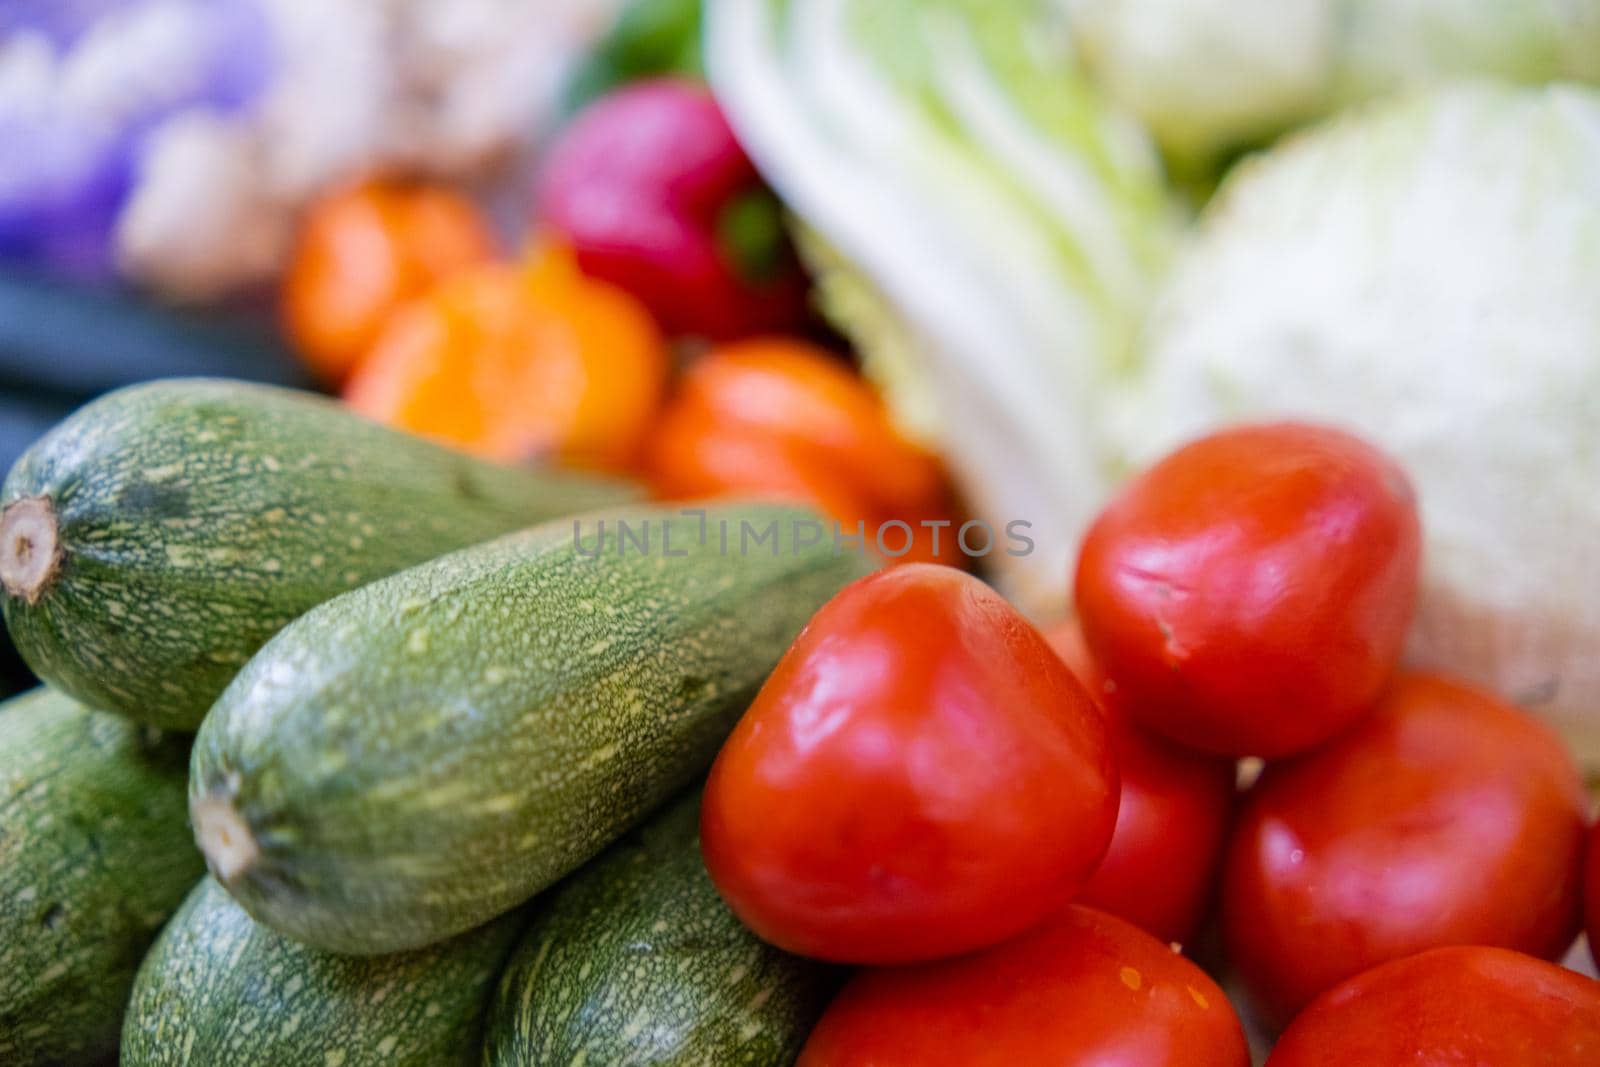 Close-up of colorful vegetable stand with tomatoes, zucchini, bell peppers and lettuce. Fresh-looking vegetables for sale on stall inside classic Mexican market. Natural healthy food